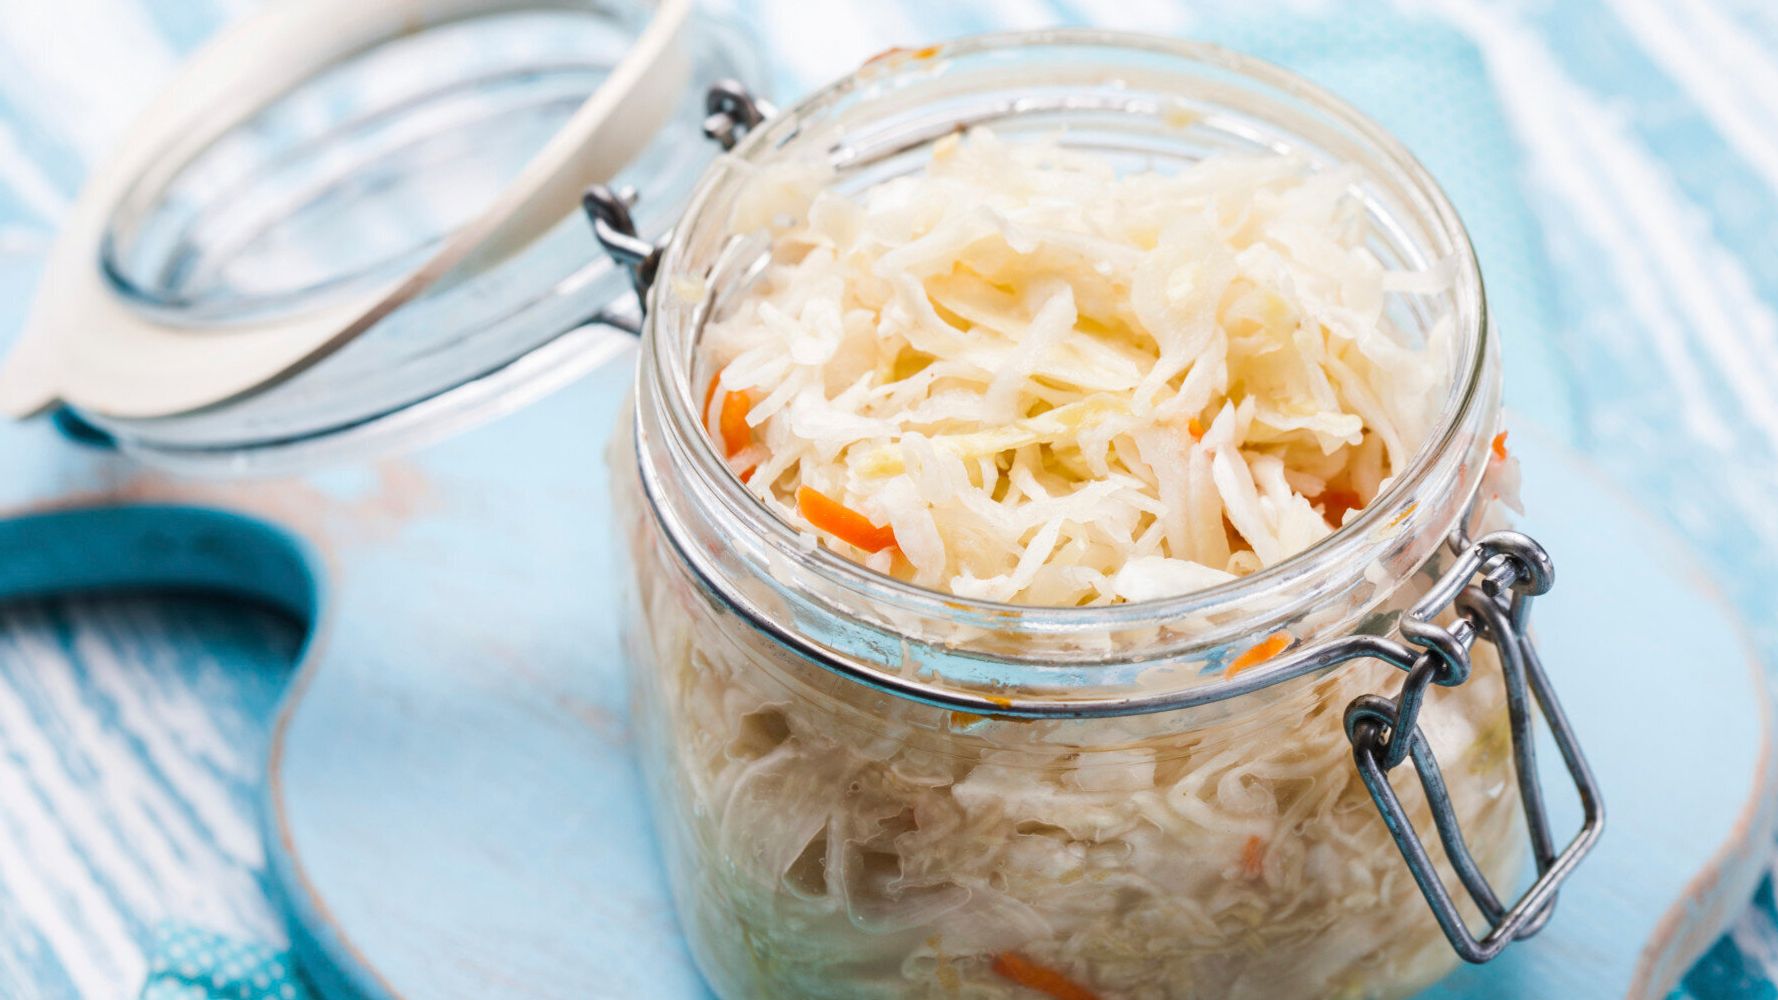 What Is Sauerkraut?: Health Benefits And Recipes For The Fashionable ...